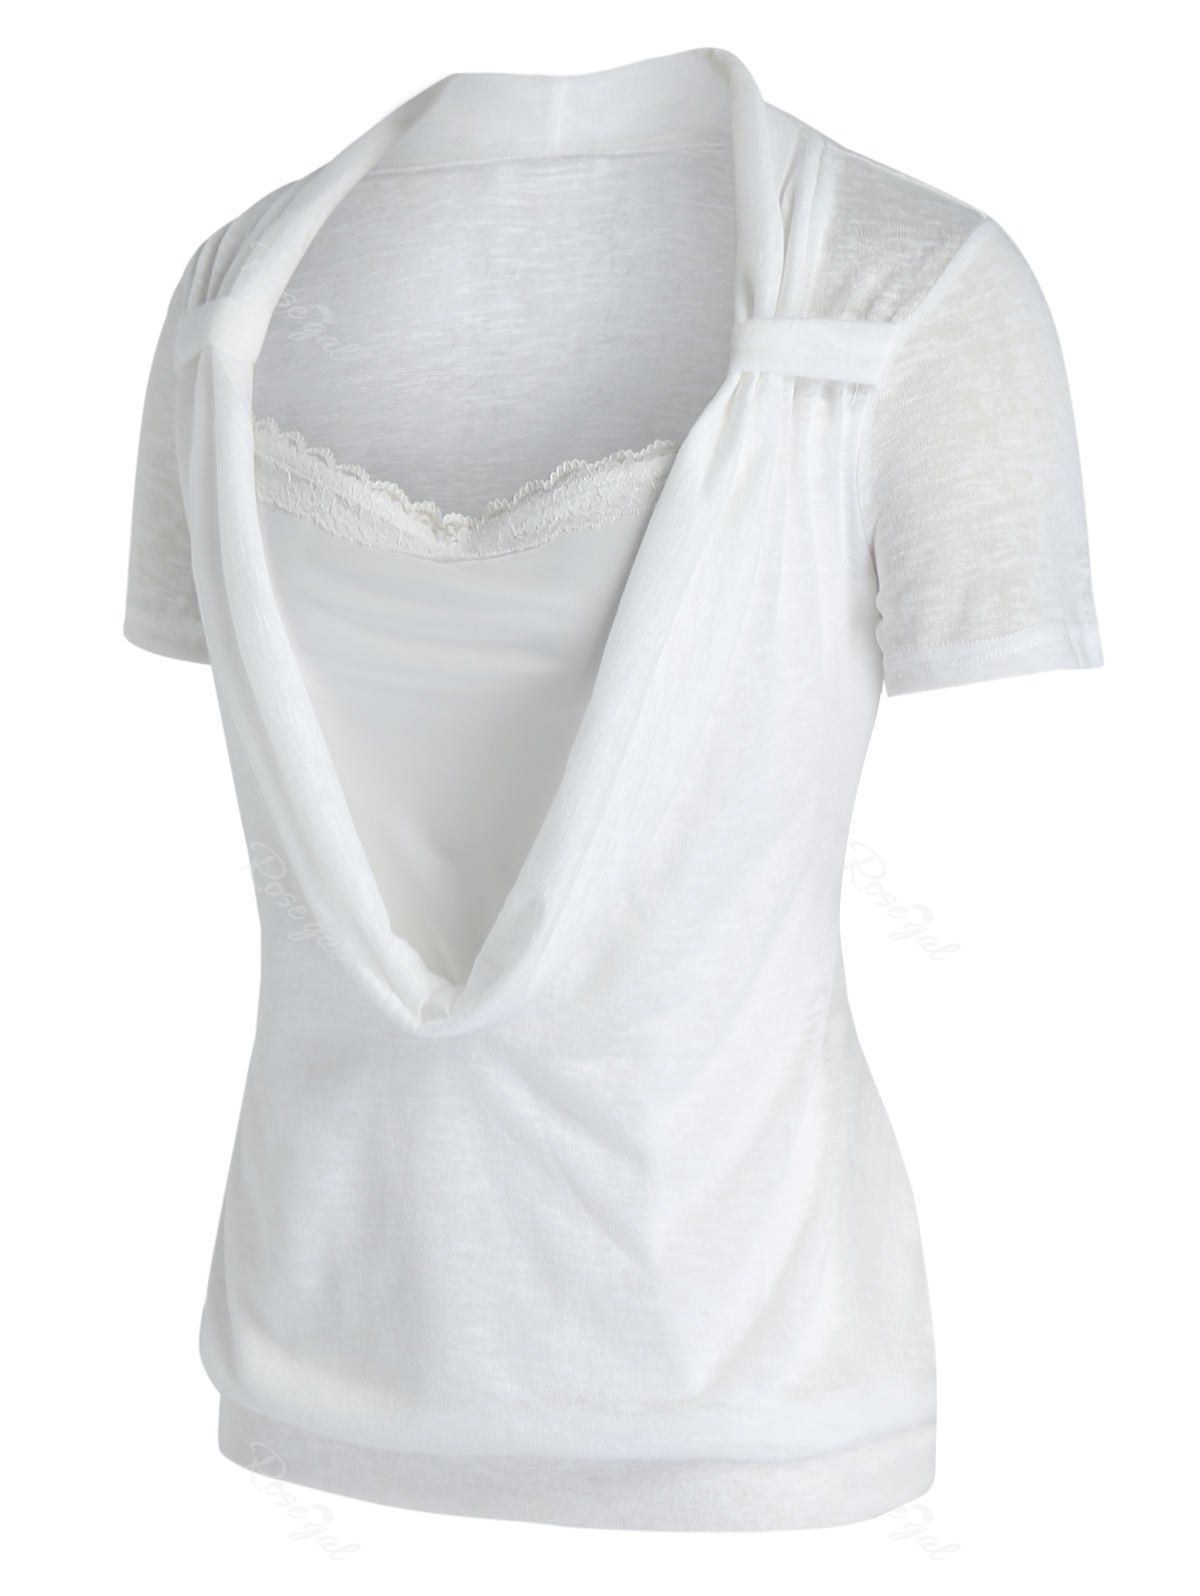 Fancy Plus Size Cowl Front Marled Lace Embellished T Shirt  